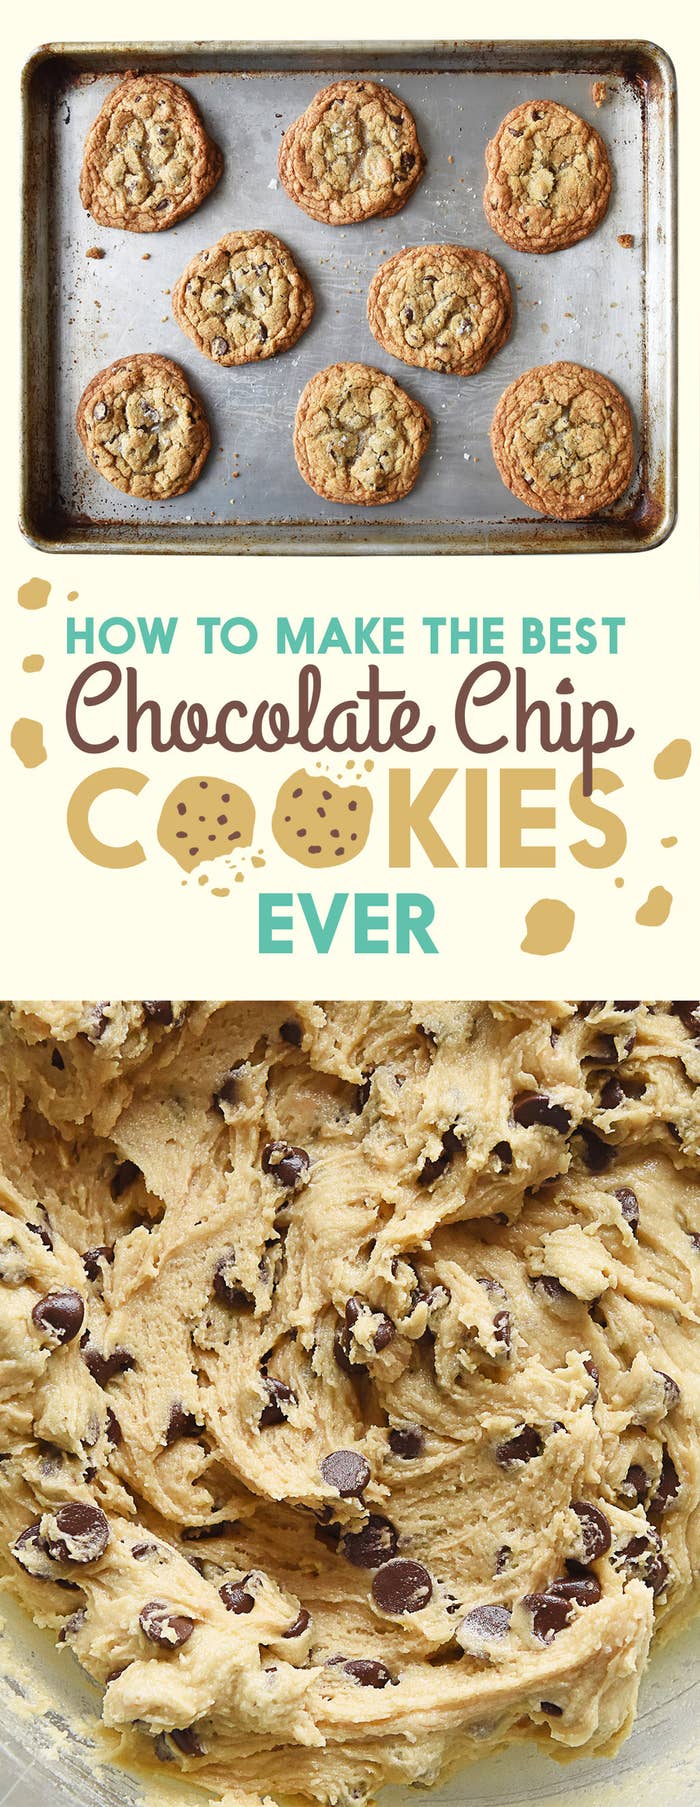 Here's How To Make The World's Greatest Chocolate Chip Cookies